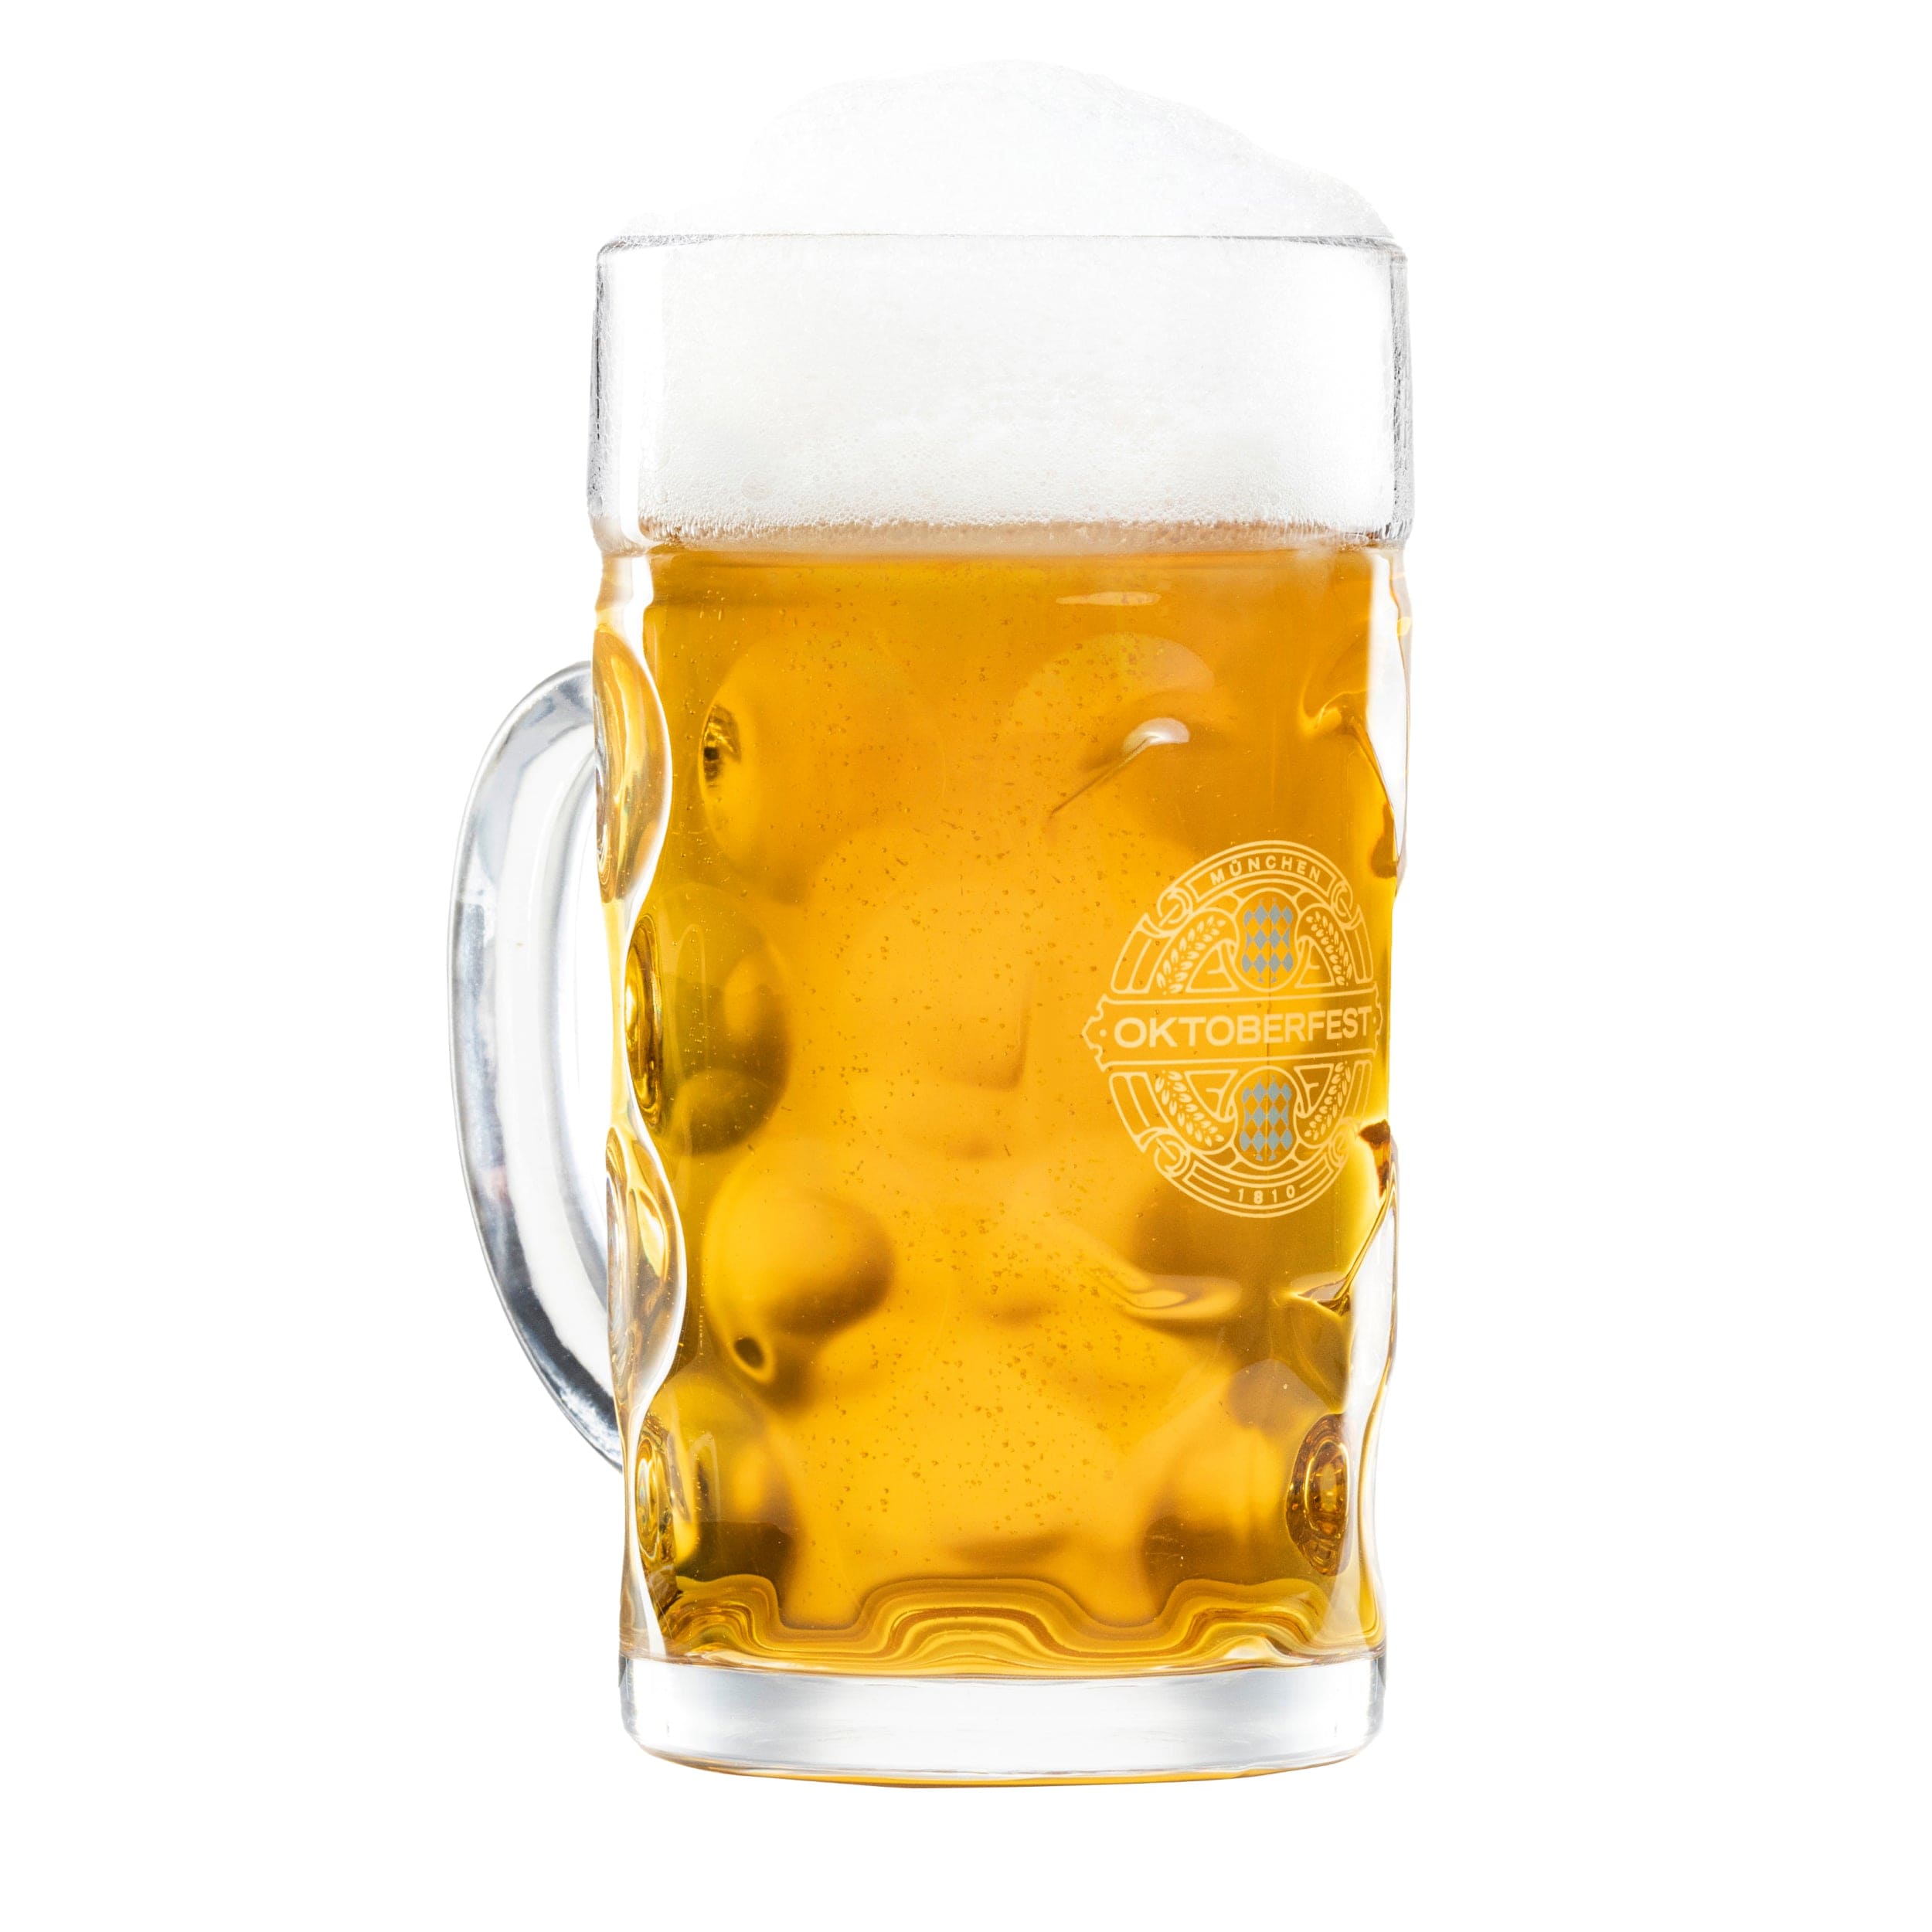 1L Beer Glass Large Capacity Thick Beer Mug Water Crystal Glass